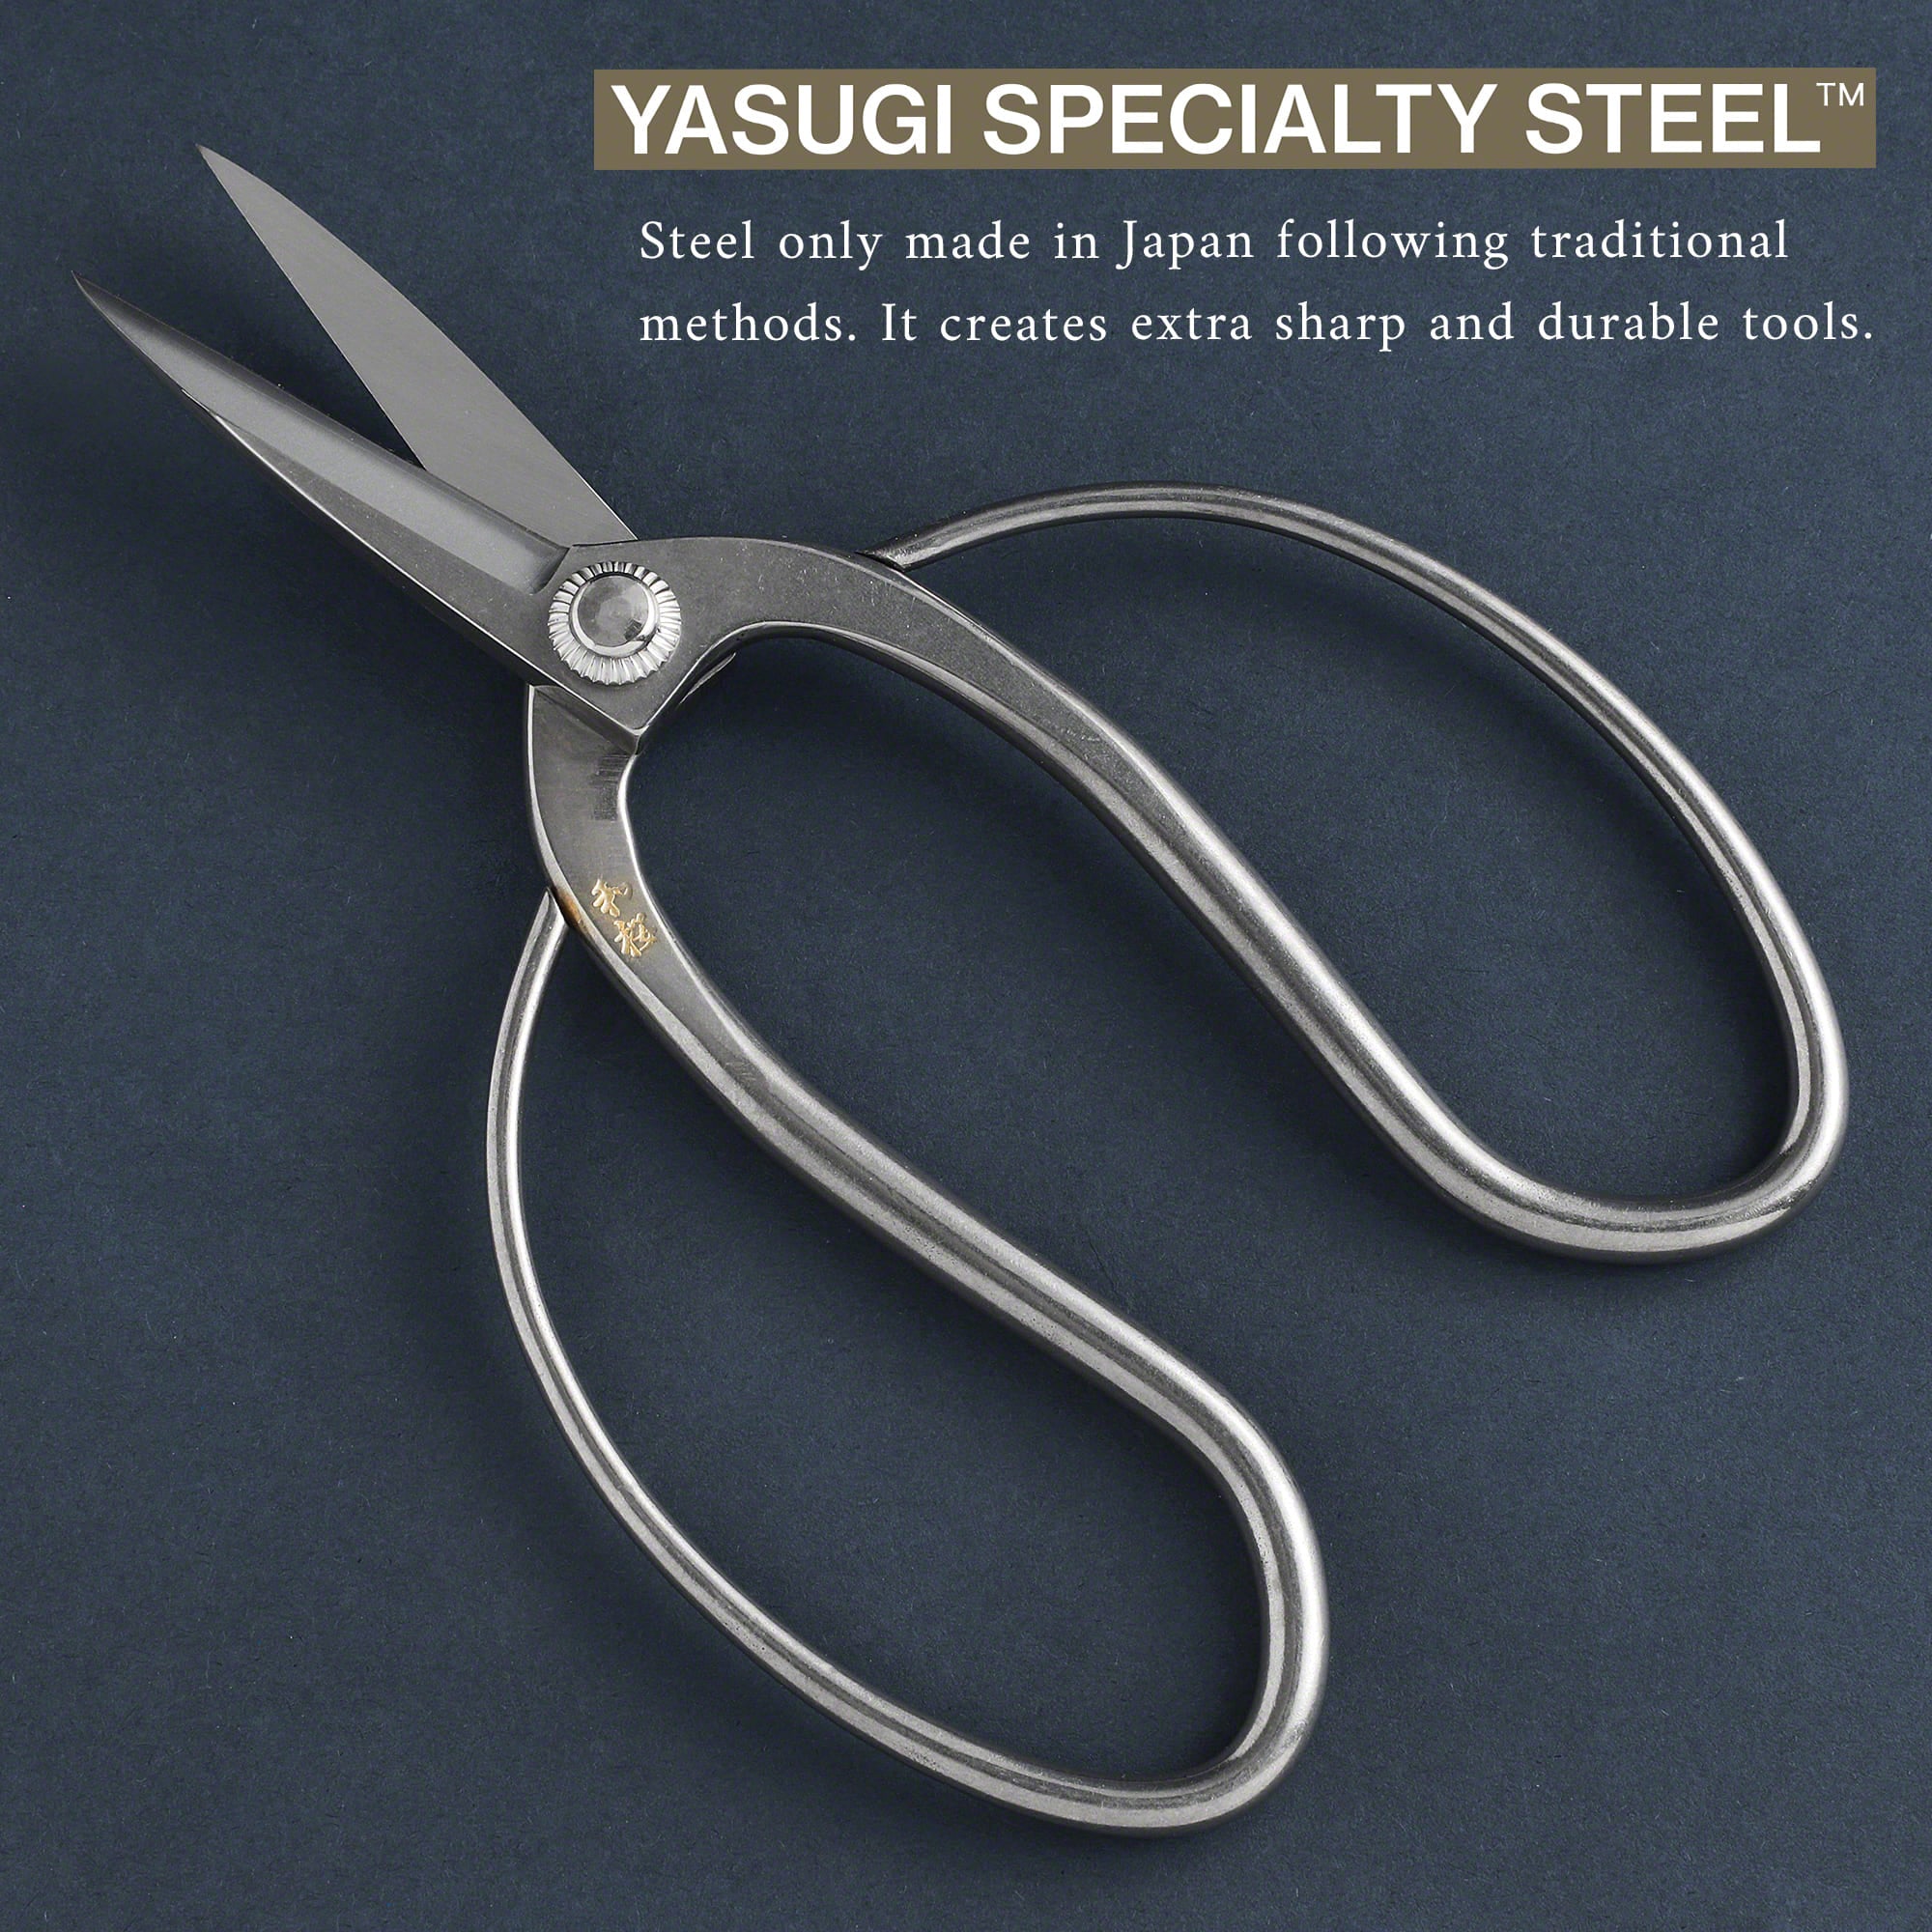 Enso Kitchen Shears - Stainless Steel, Made in Japan